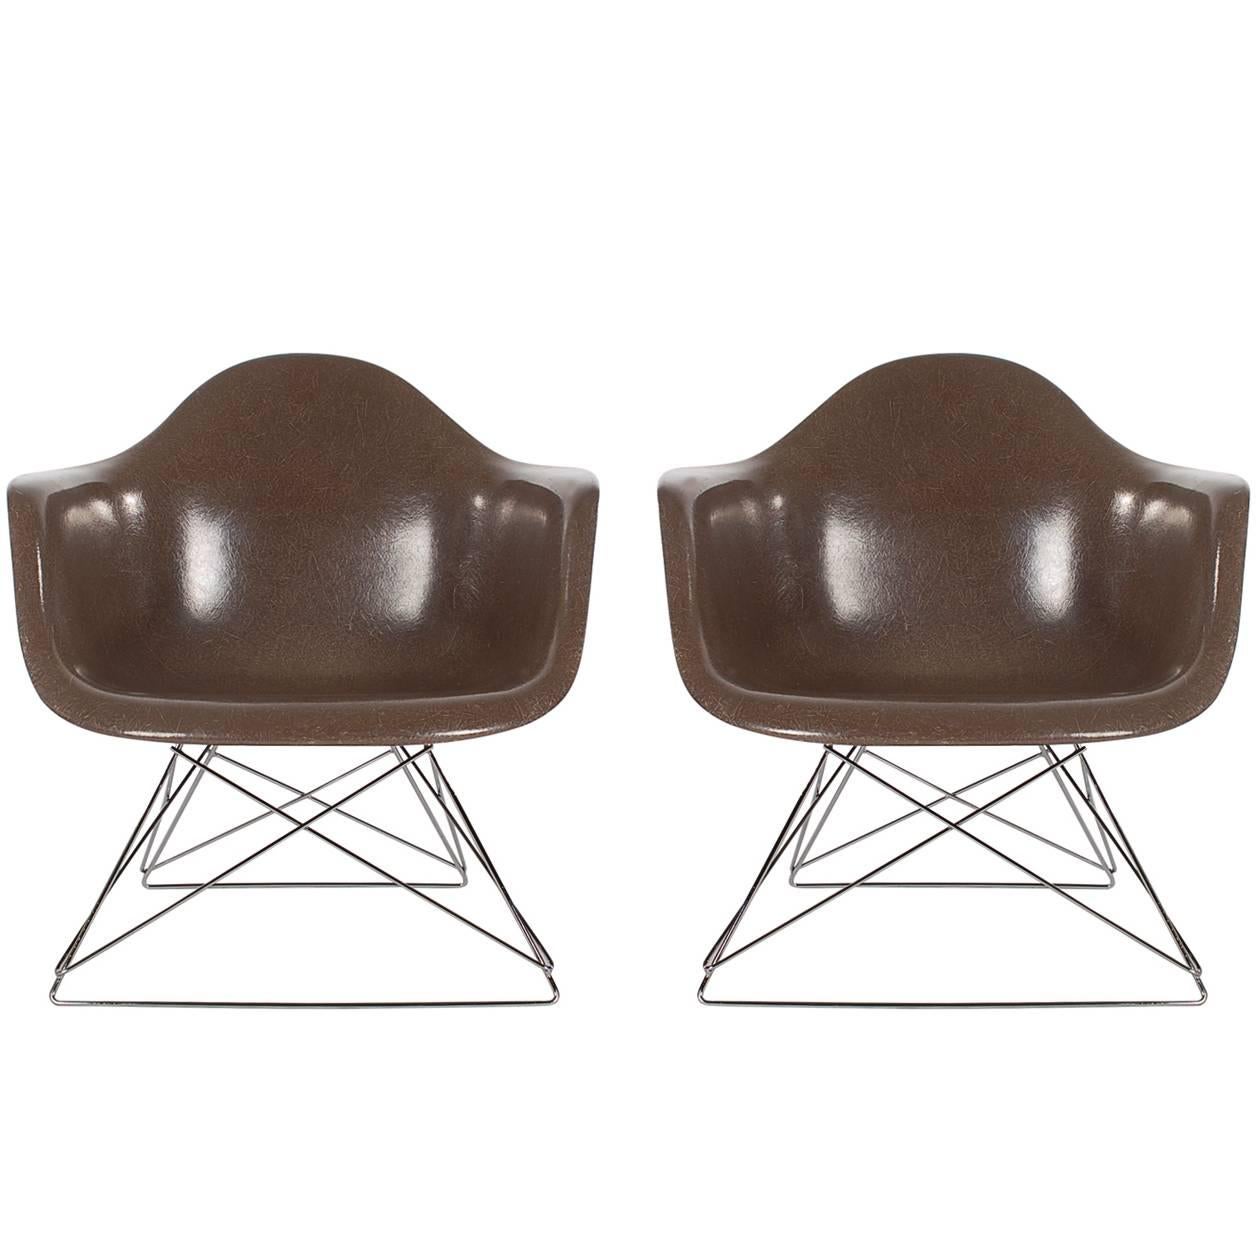 Mid-Century Modern Charles Eames for Herman Miller Fiberglass Lounge Chairs